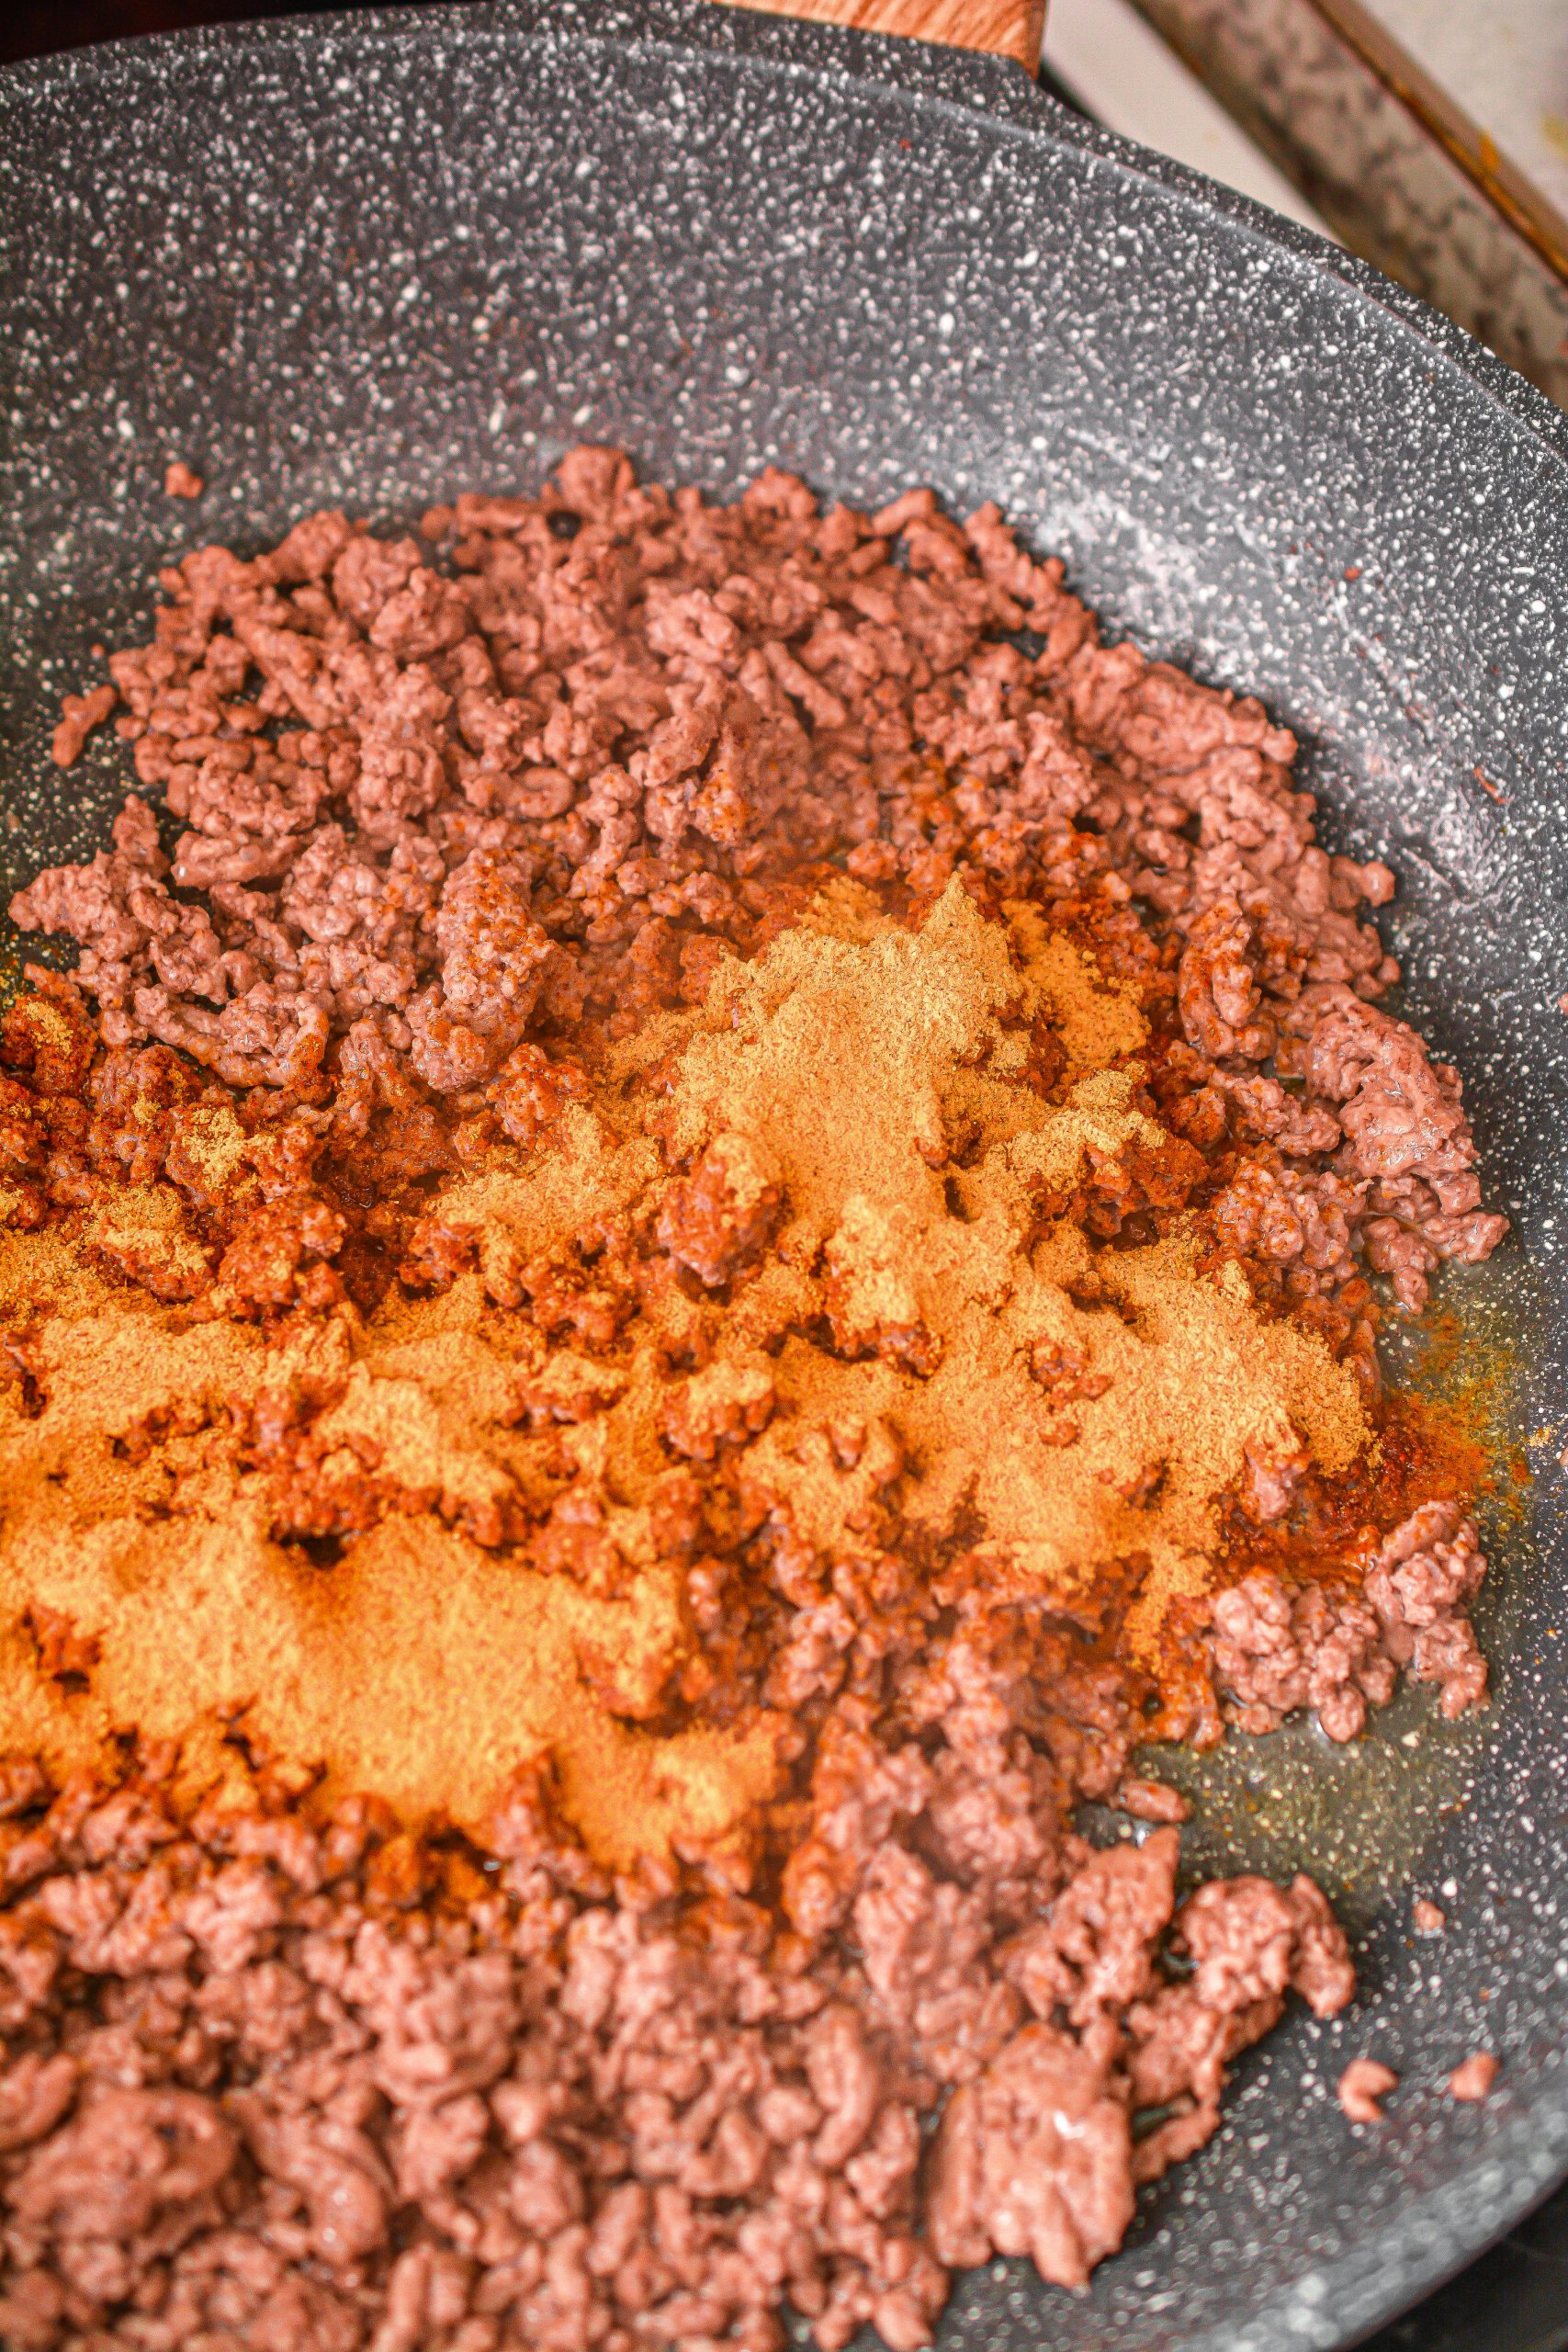 Reduce the heat to medium and add the taco seasoning. Stir to combine and saute another minute or two.